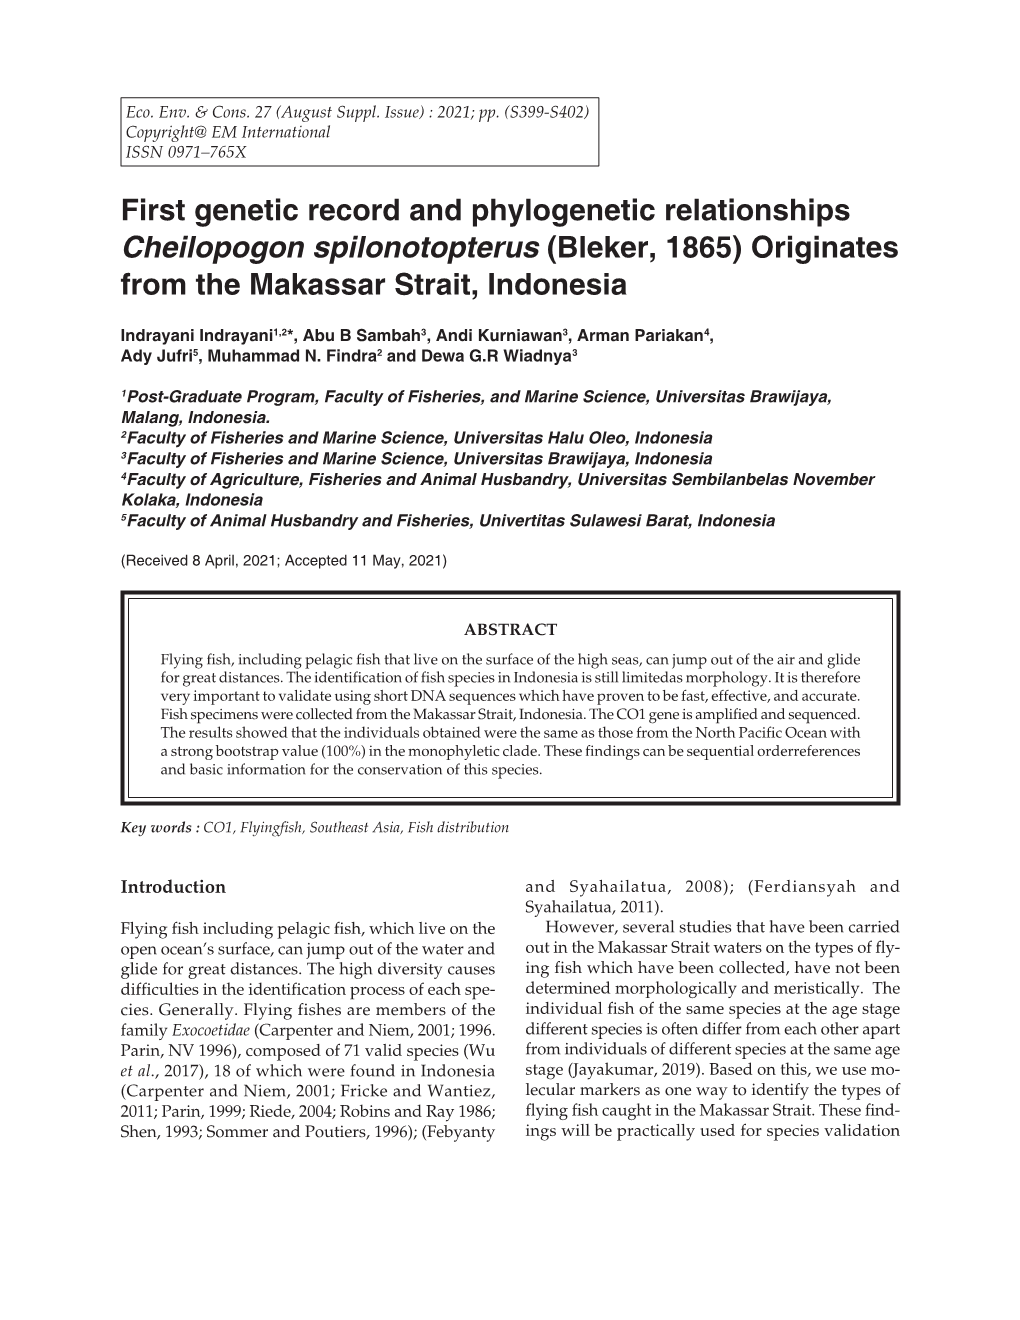 First Genetic Record and Phylogenetic Relationships Cheilopogon Spilonotopterus (Bleker, 1865) Originates from the Makassar Strait, Indonesia